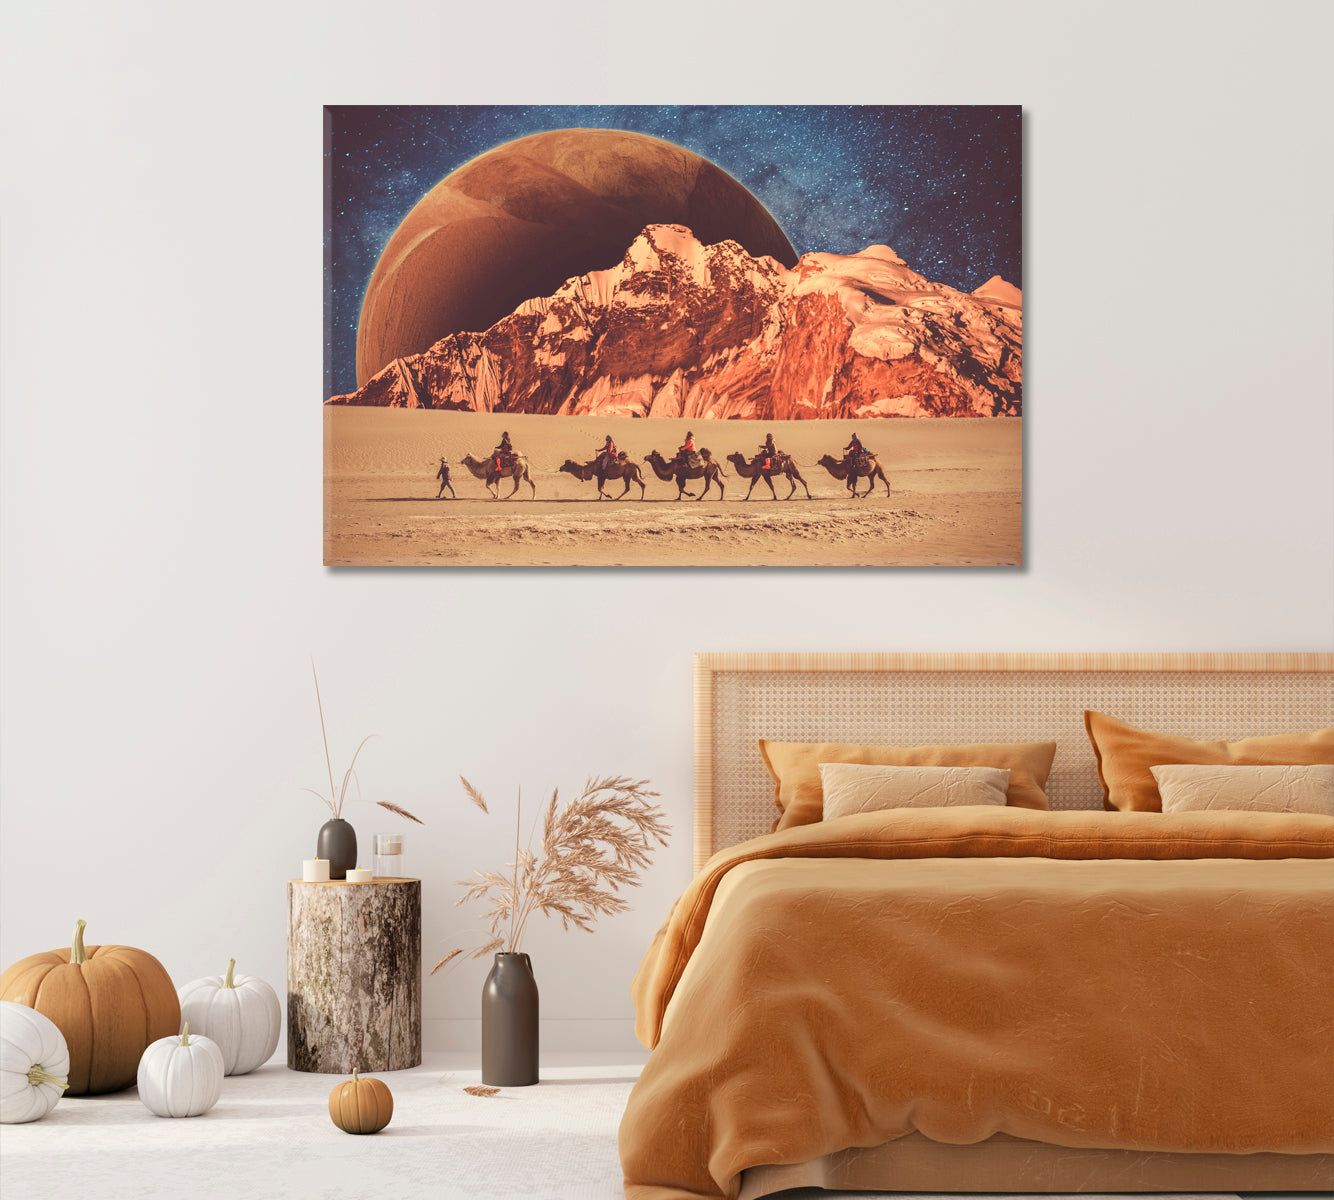 Fantasy Desert in Universe with Camels Canvas Print-Canvas Print-CetArt-1 Panel-24x16 inches-CetArt